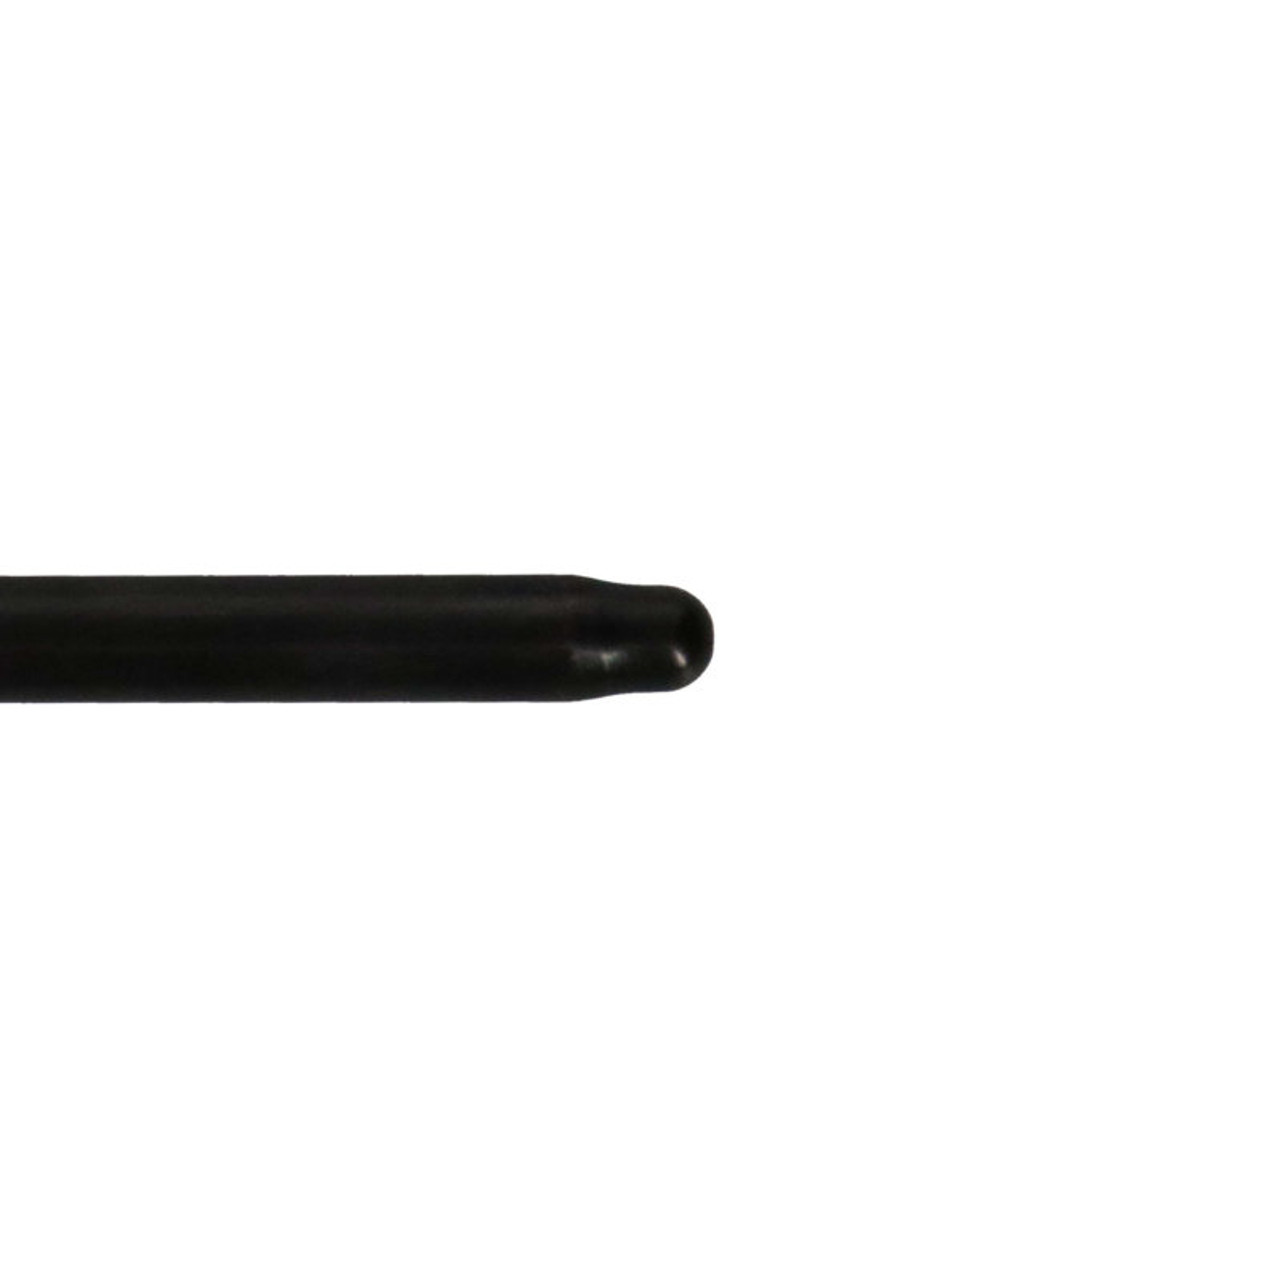 Manley Swedged End Pushrods .135in. wall 8.050 Length 4130 Chrome Moly (Single) - 25340-1 User 2